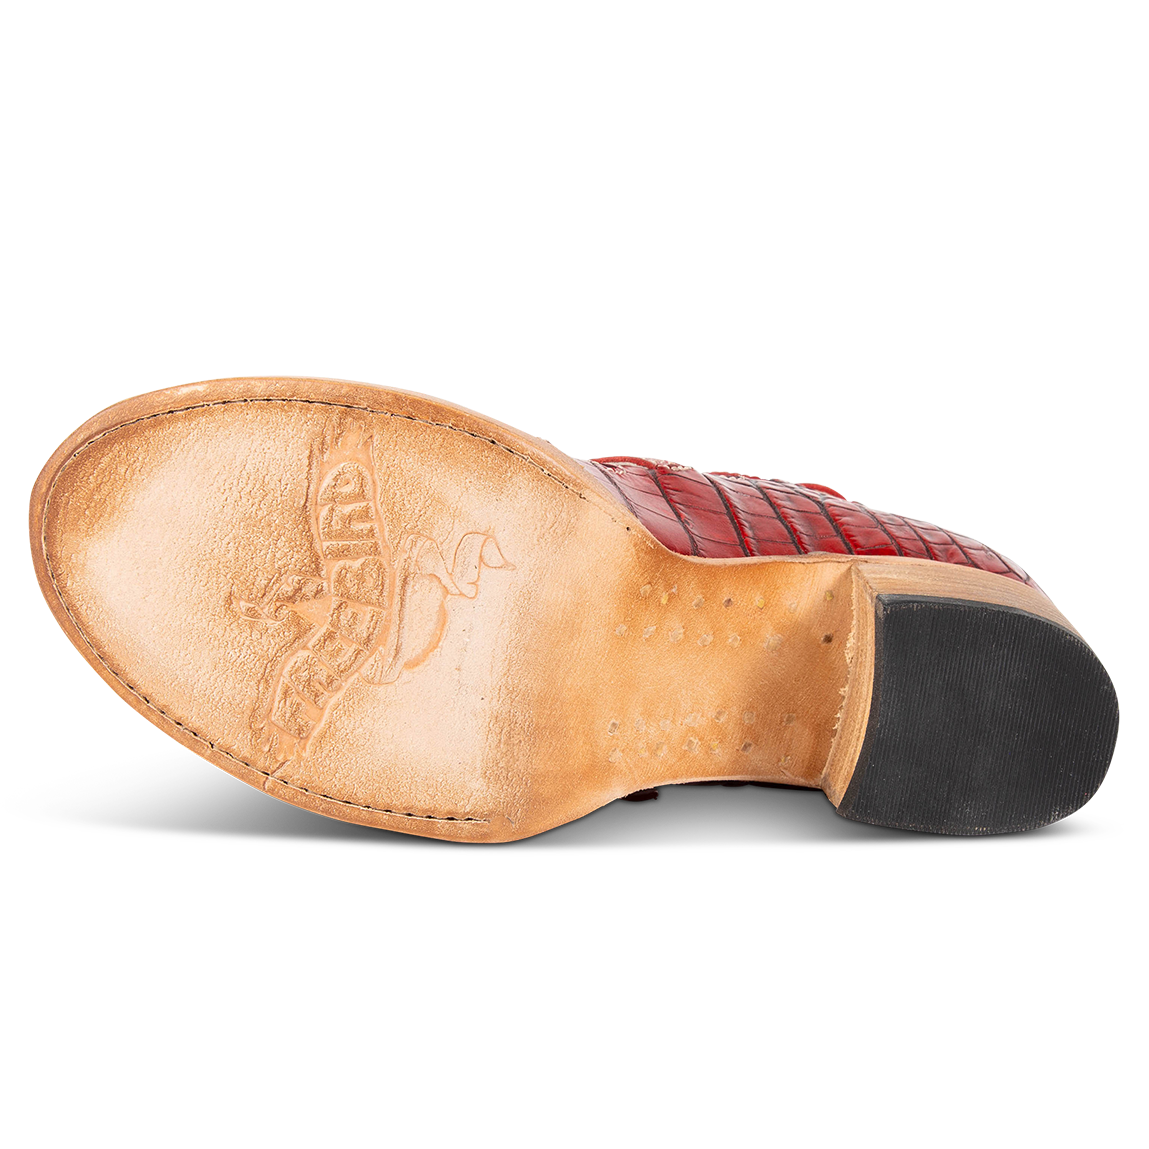 Leather sole imprinted with FREEBIRD on women's Quinn red croco sandal